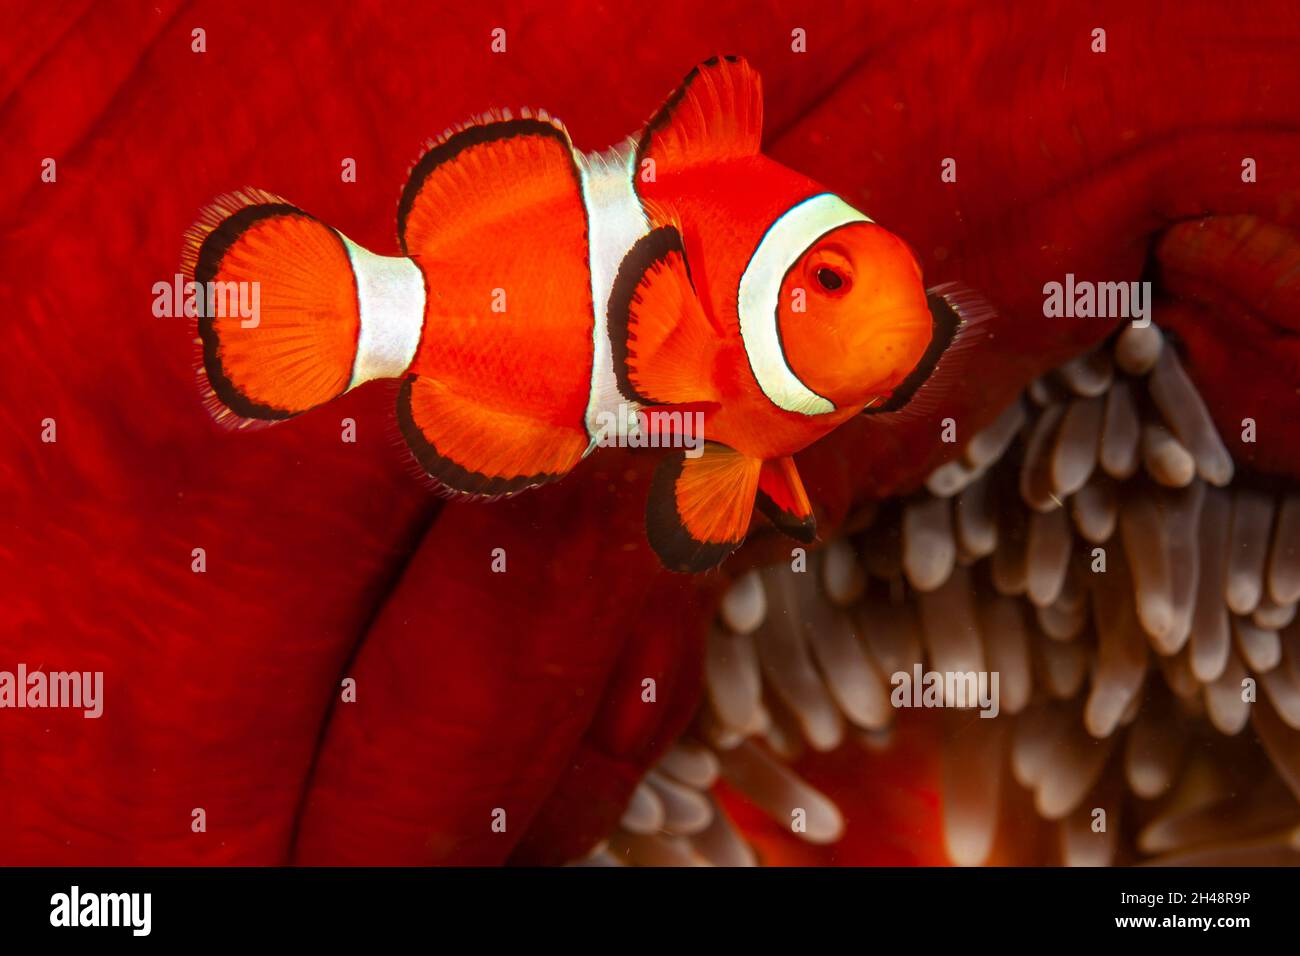 Clownfish or anemonefish are fishes from the subfamily Amphiprioninae in the family Pomacentridae. Stock Photo